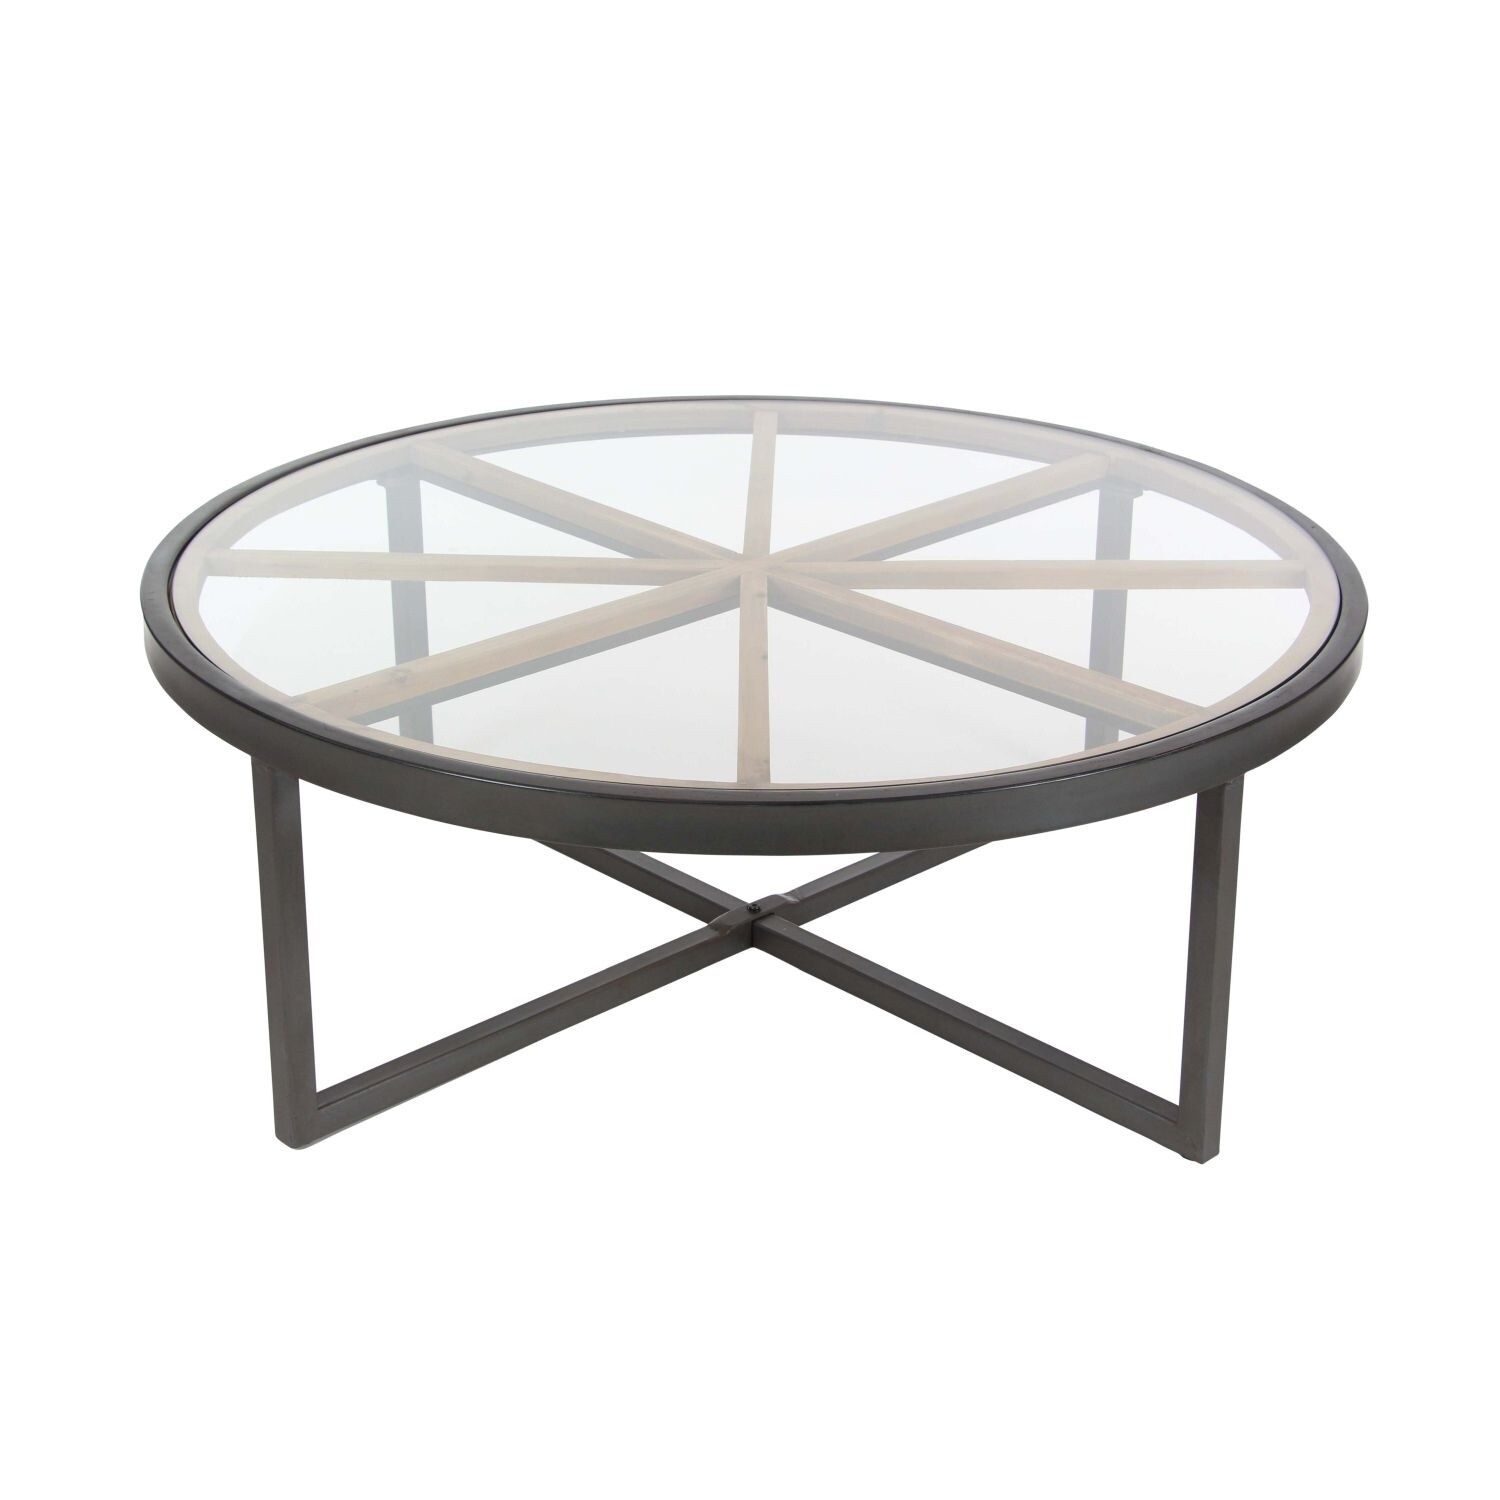 Studio 350 Metal Glass Wood Coffee Table 39 Inches Wide, 14 Inches High –  Bed Bath & Beyond – 17240699 Regarding Studio 350 Black Metal Coffee Tables (View 8 of 15)